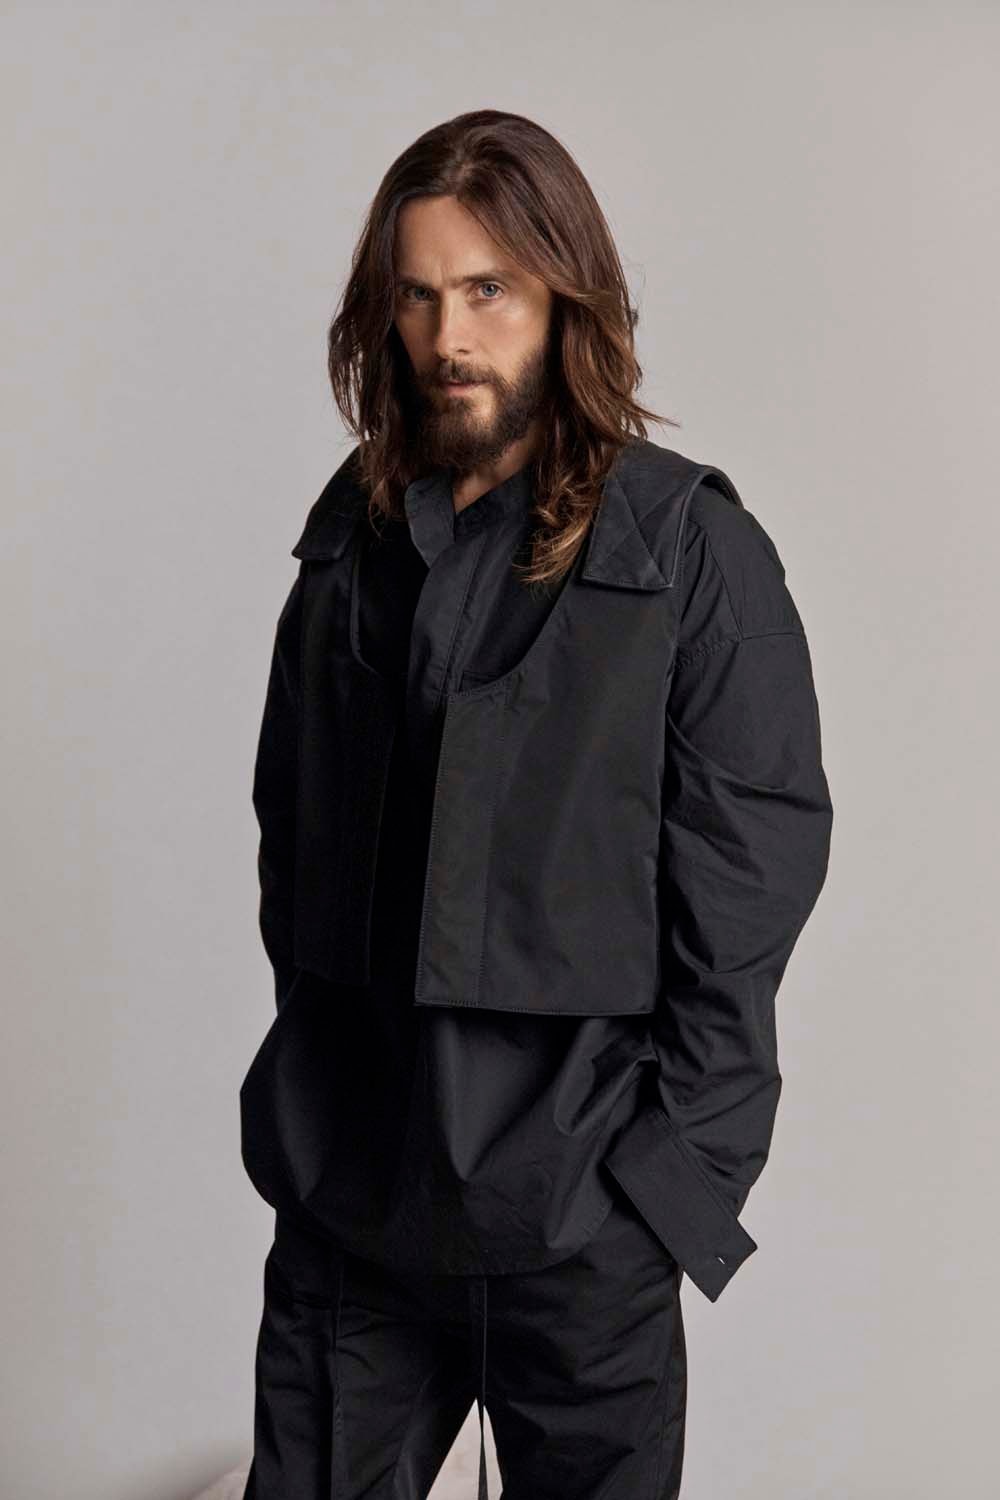 Fear of God fall winter 2018 lookbook collection nike collaboration drop september 5 6 2018 release date movie film video